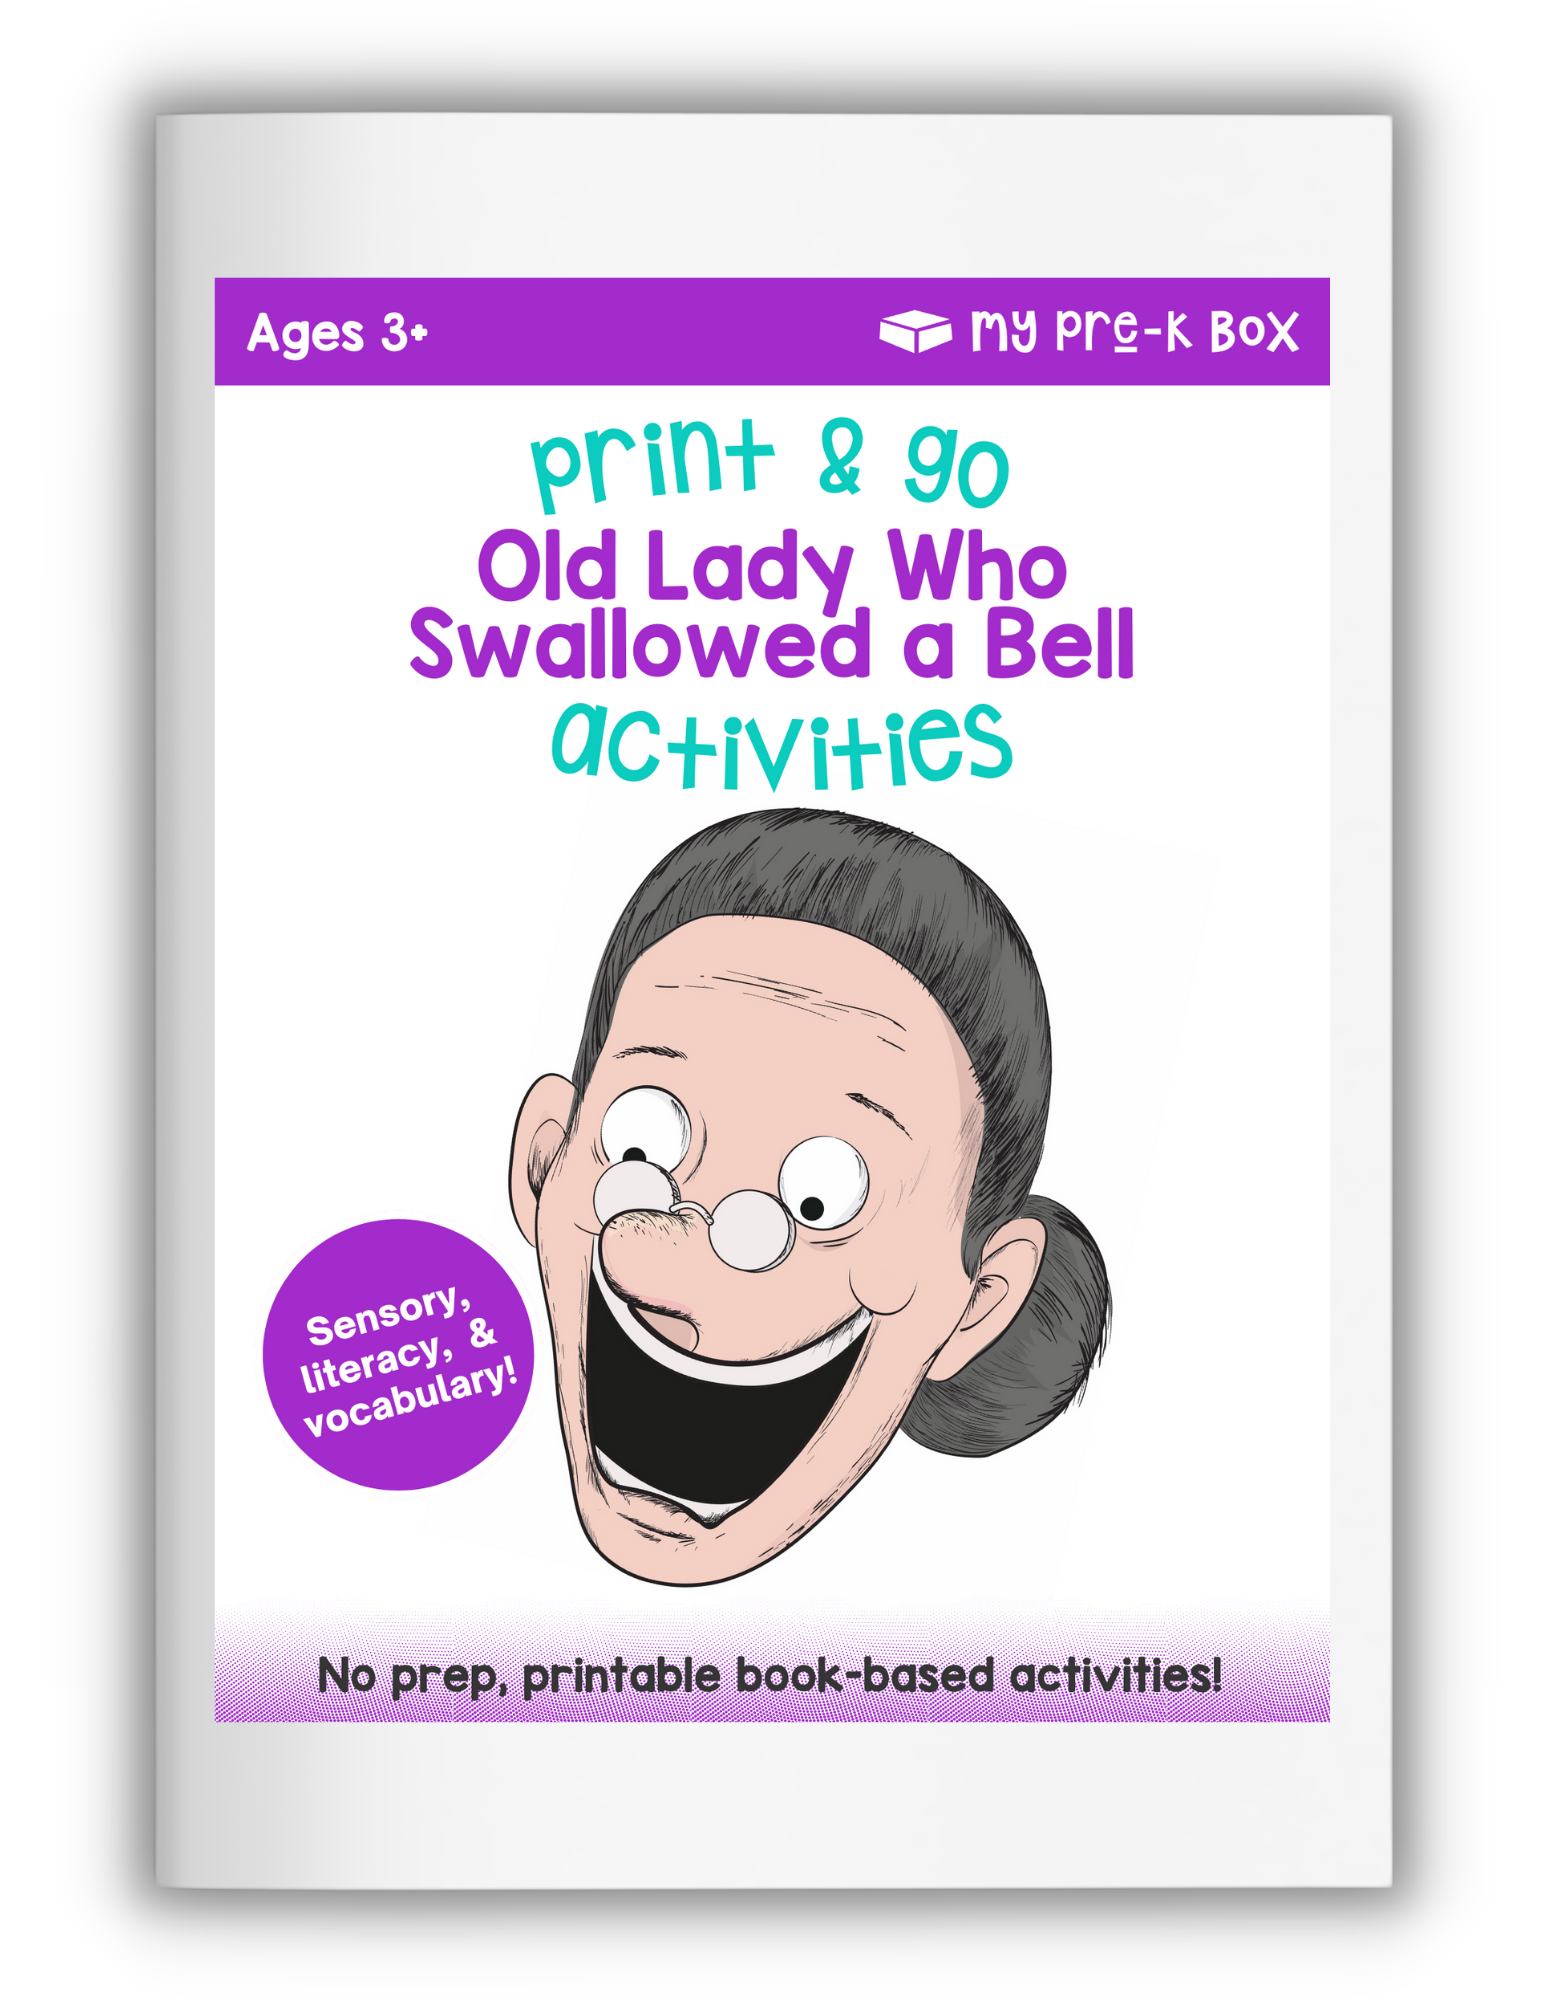 Free Old Lady Print Who Swallowed A Bell Print & Go Activities 